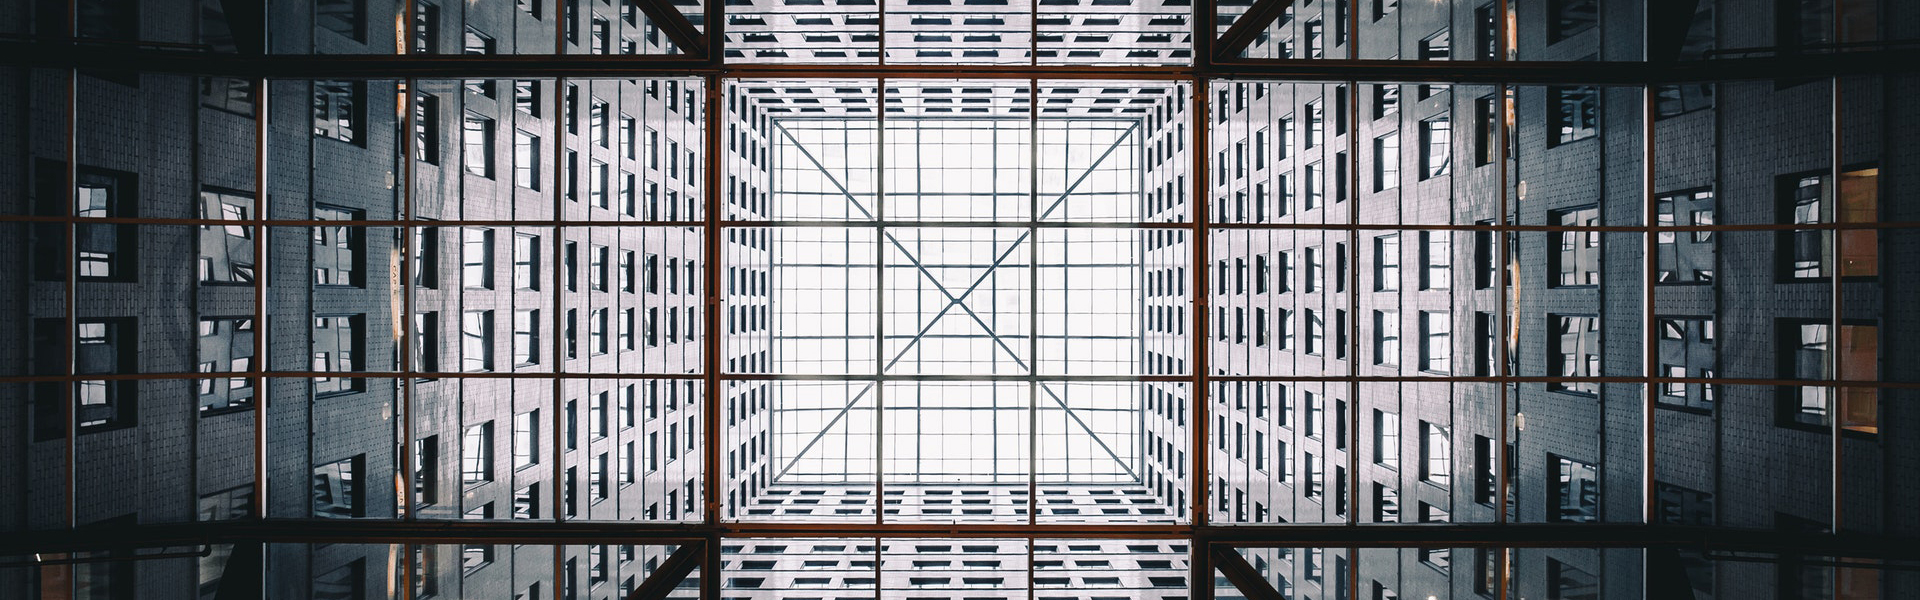 Image of architectural ceiling looking up